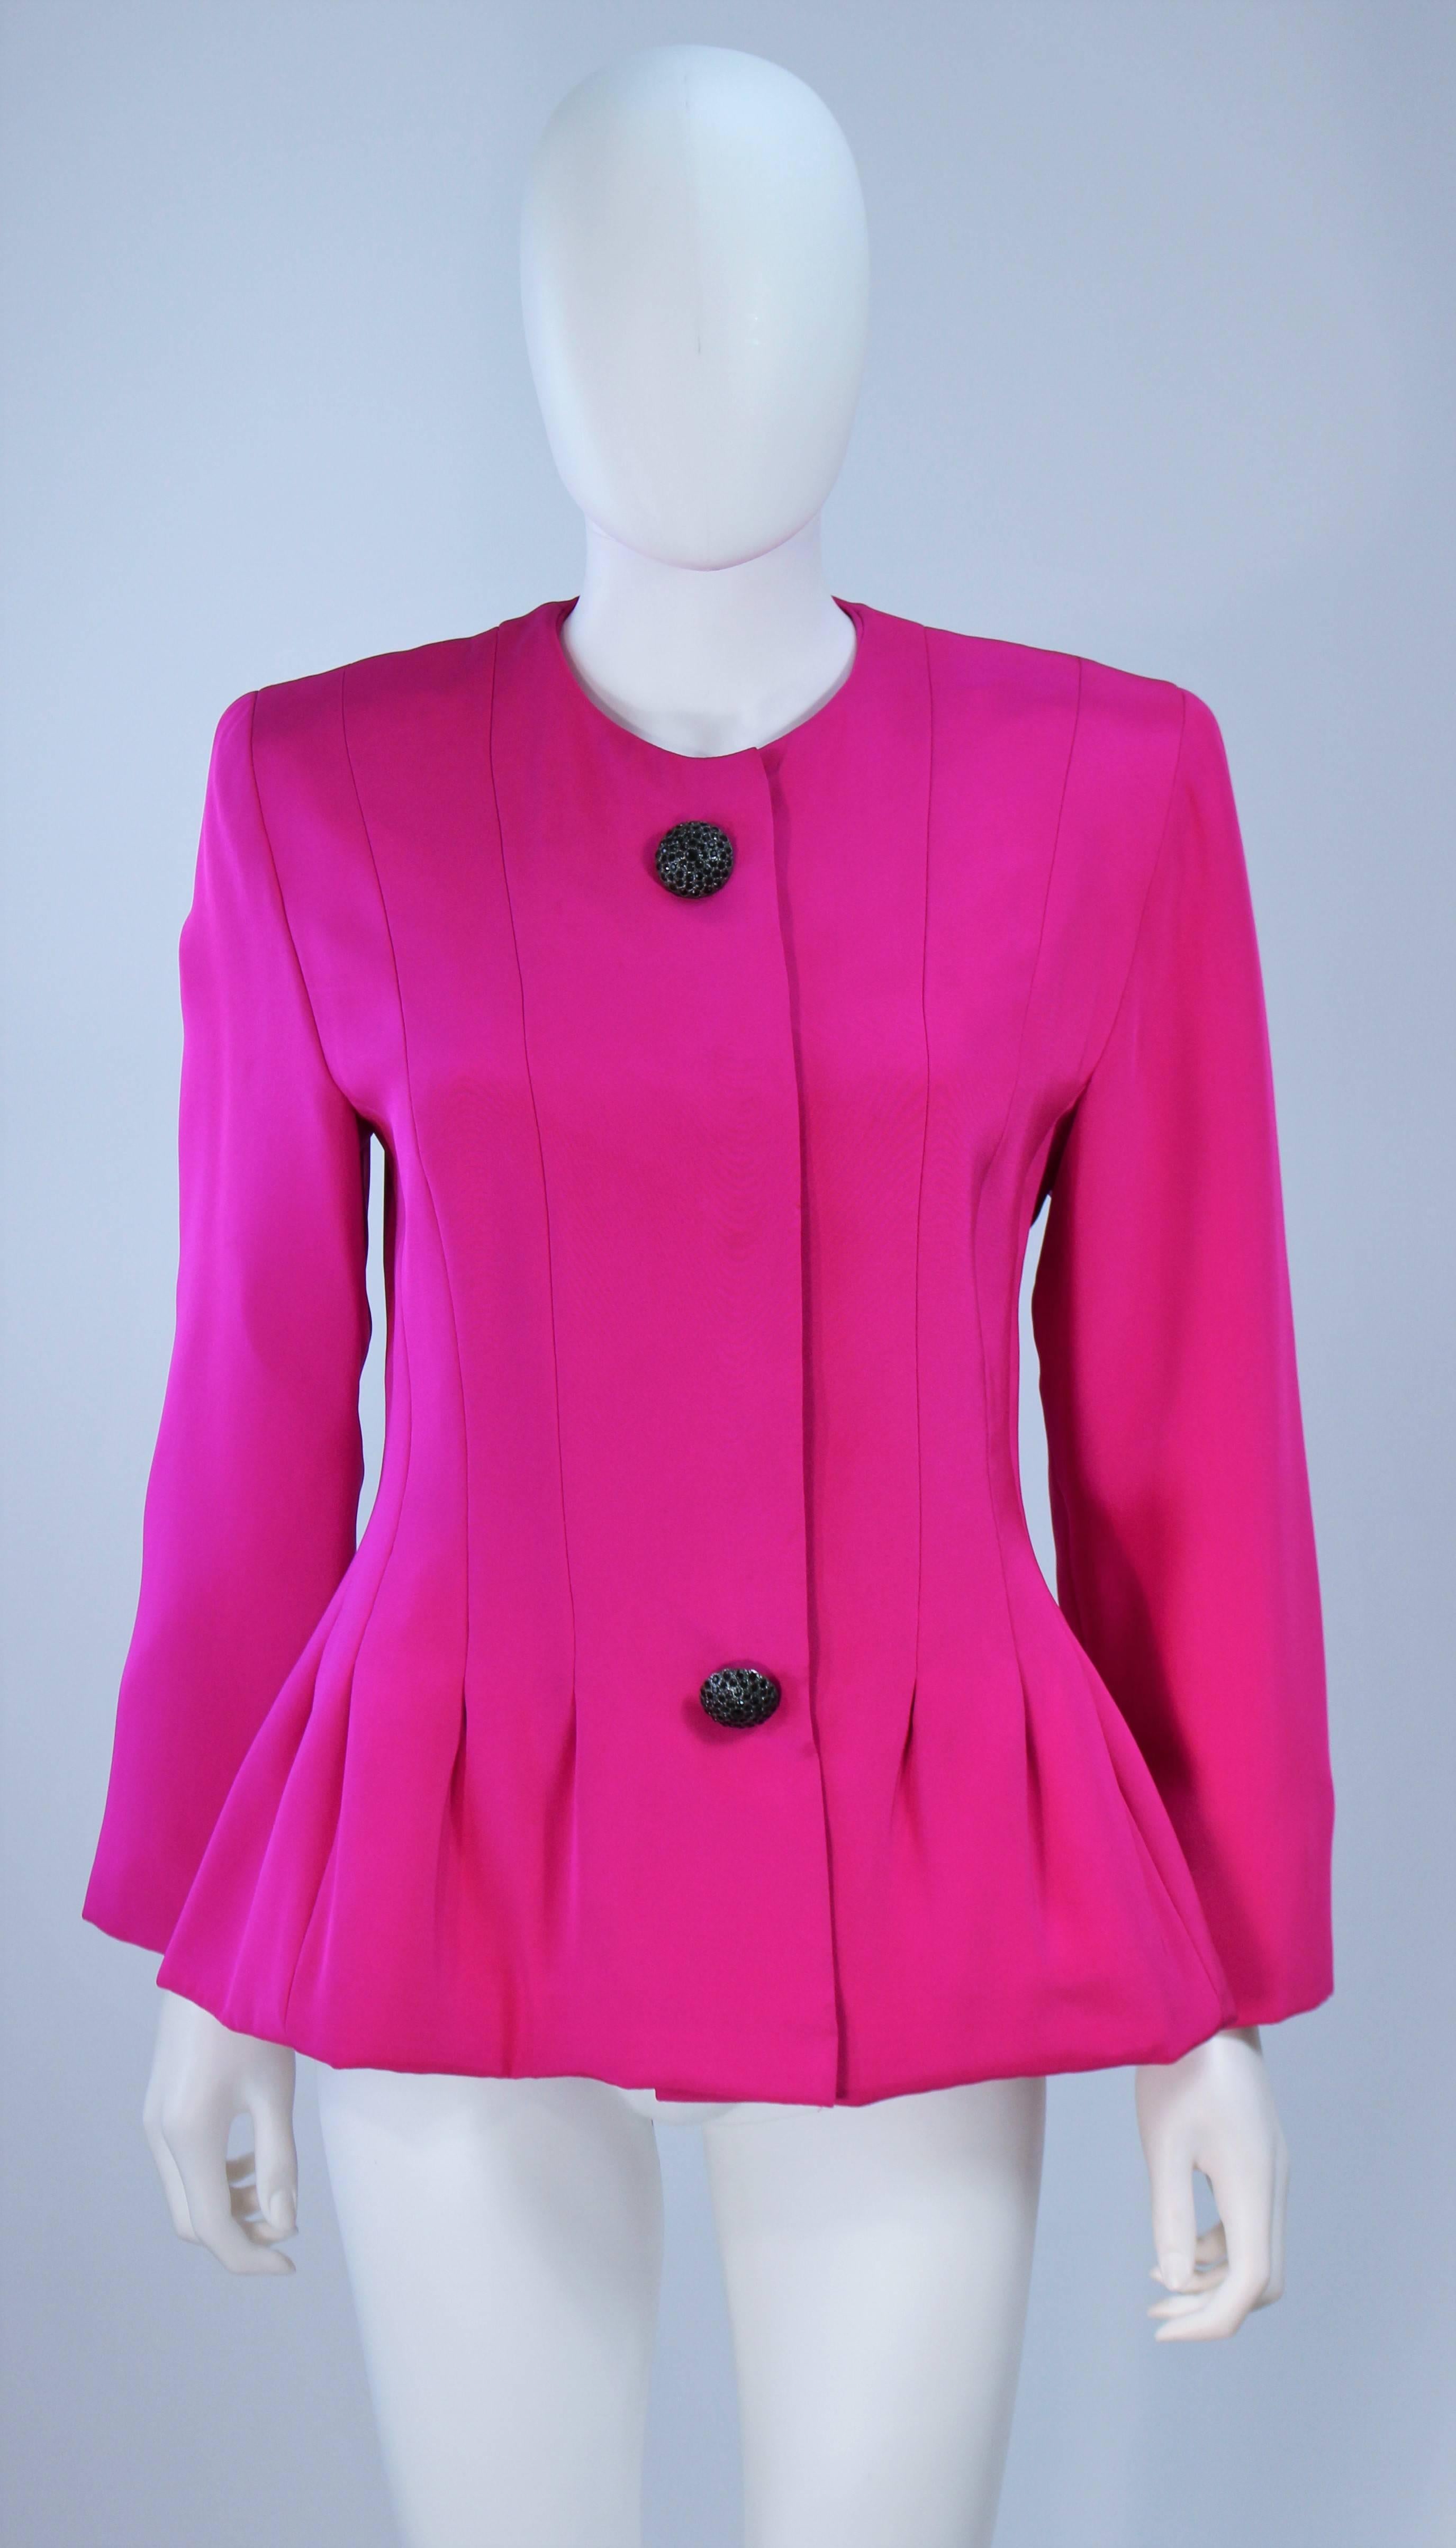 JACQUELINE DE RIBES Silk Magenta Skirt Suit with Sequin Blouse Size 6 In Excellent Condition For Sale In Los Angeles, CA